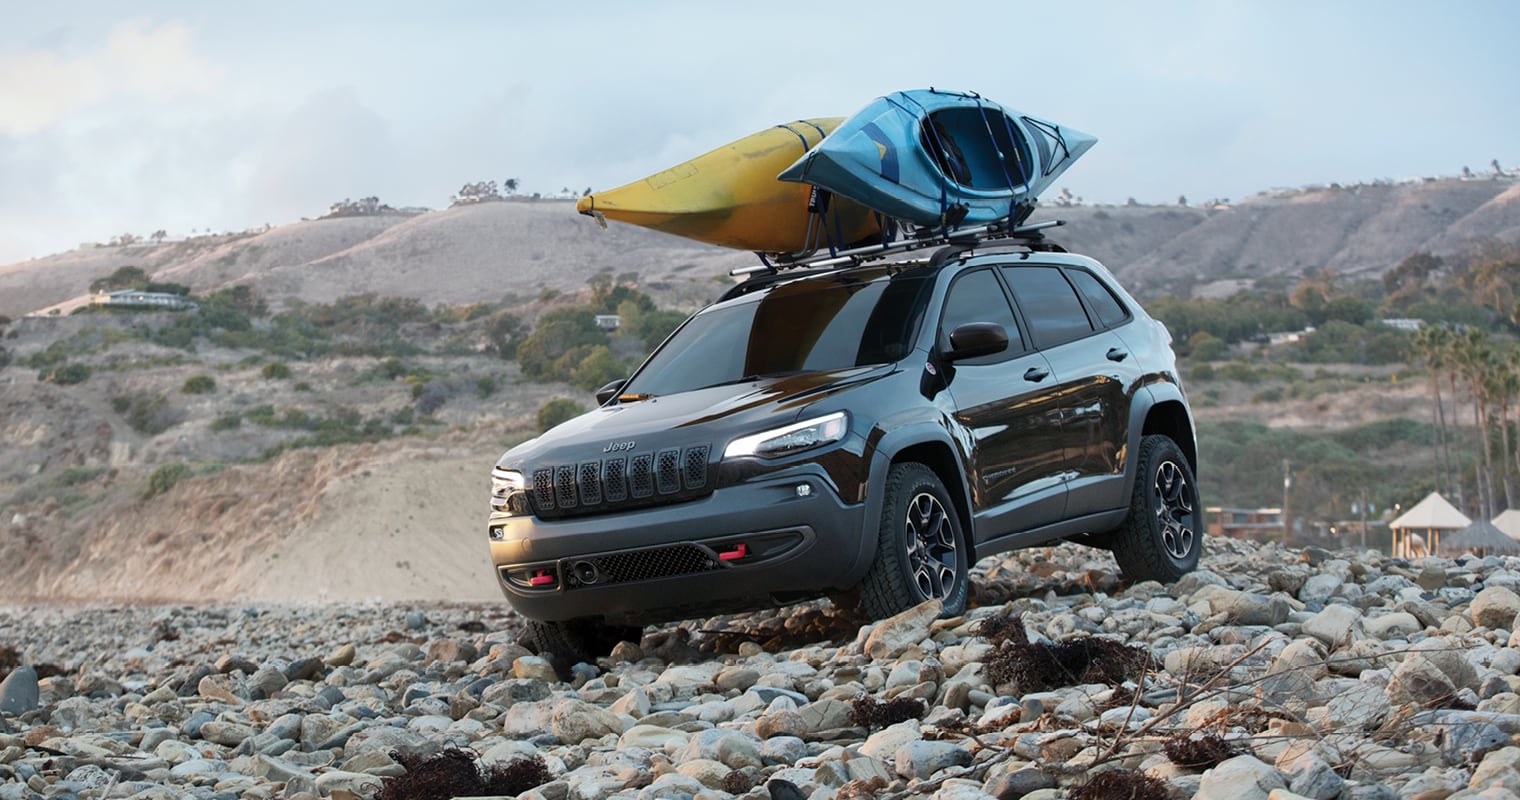 2022 Jeep Cherokee exterior with roof rack